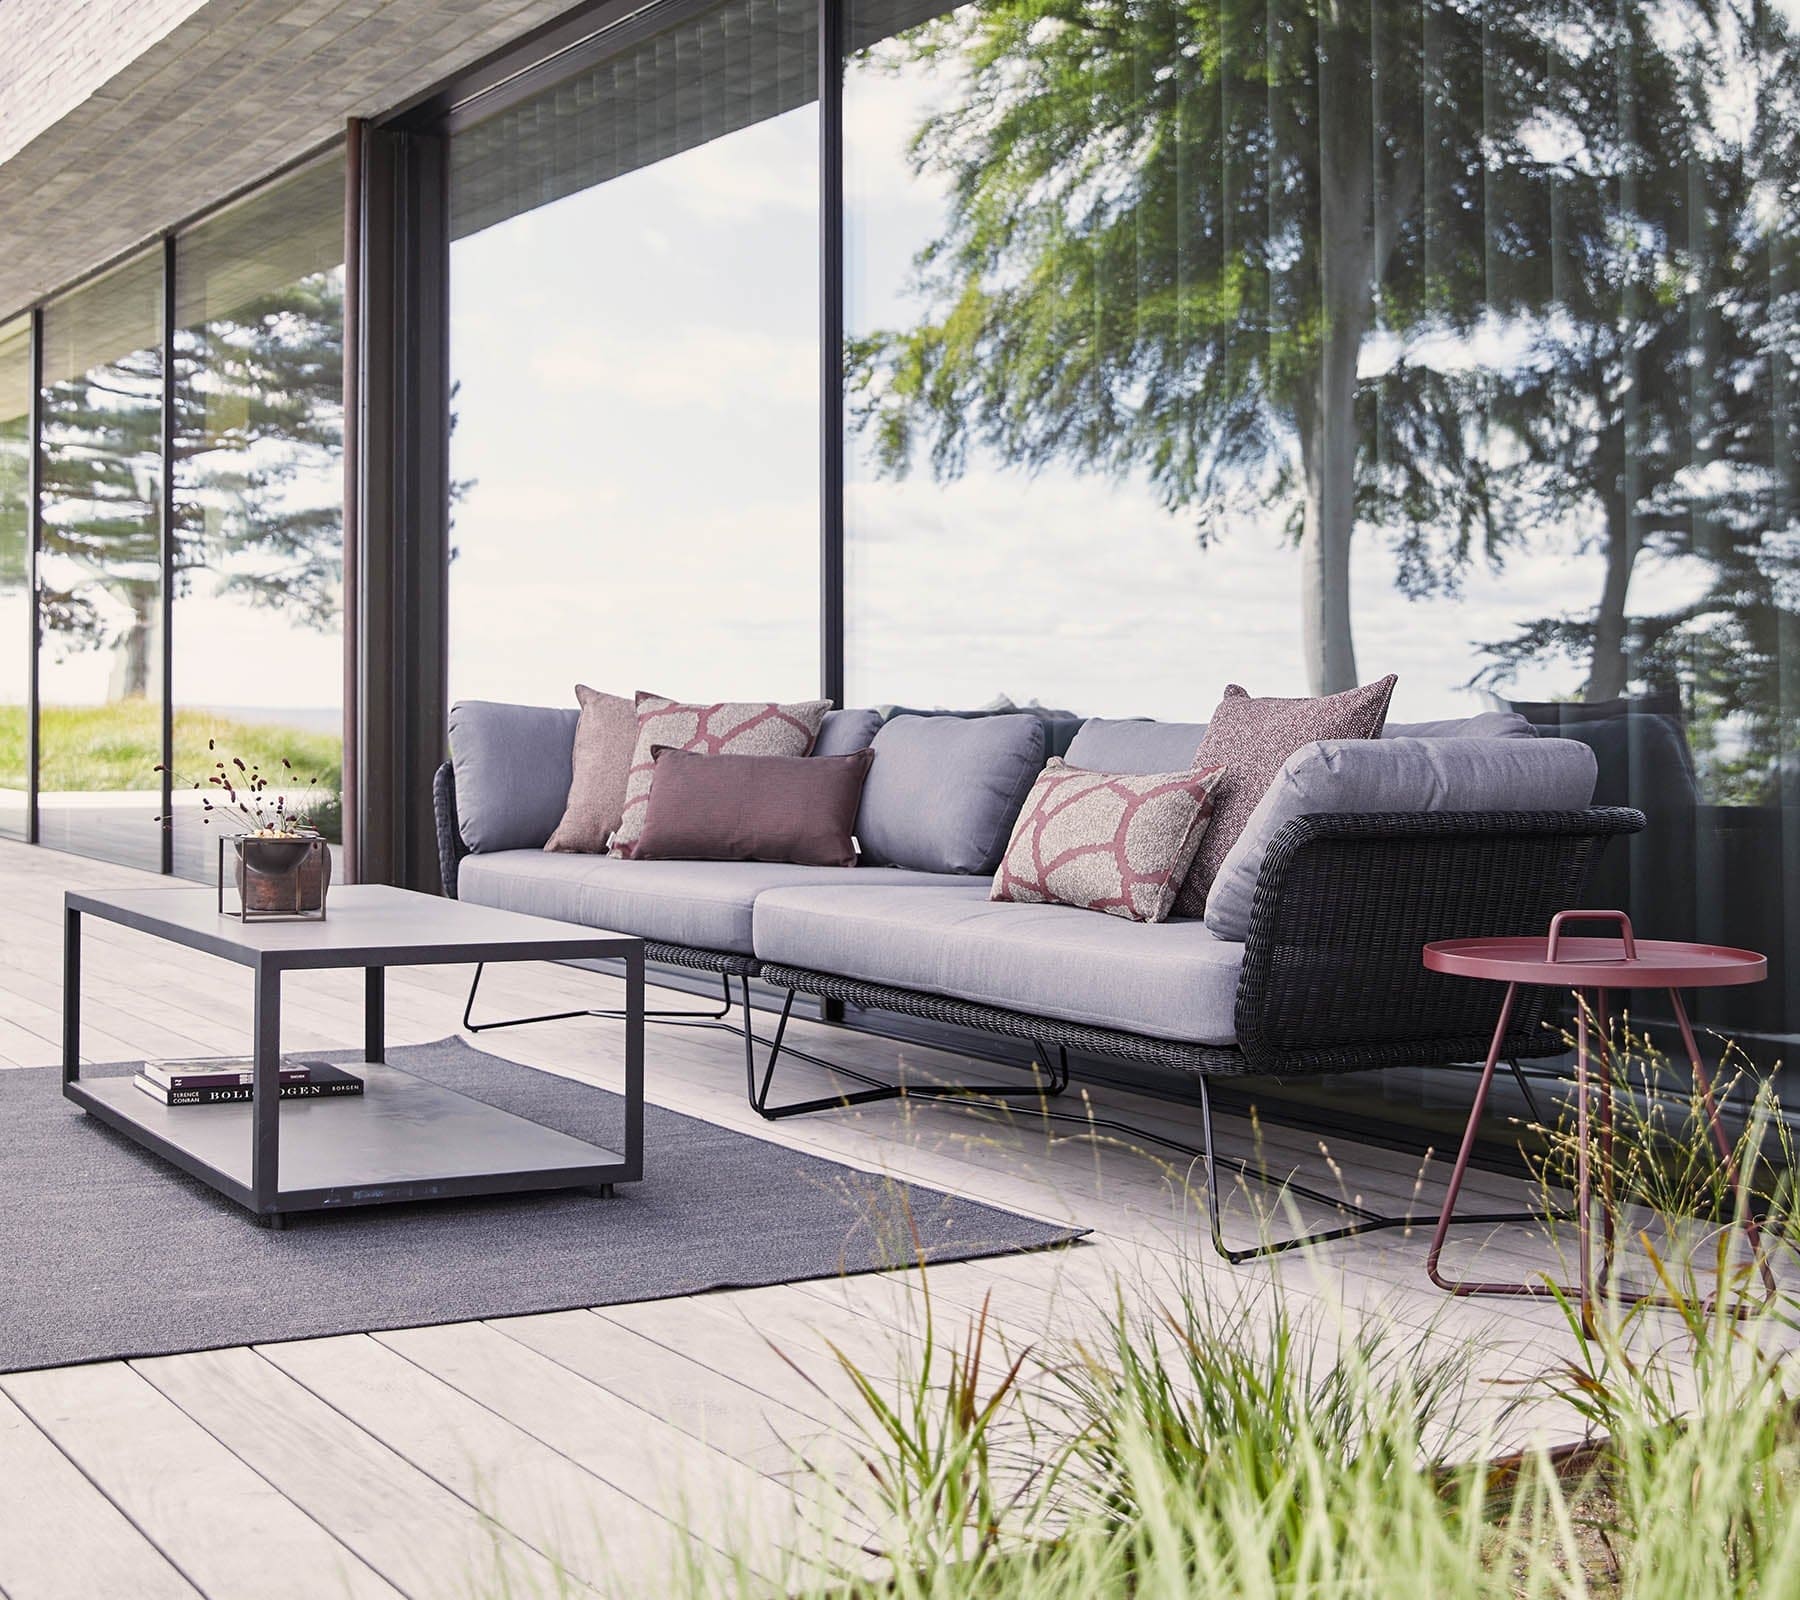 Boxhill's Horizon 2-Seater Outdoor Left Module Sofa lifestyle image together with Horizon 2-Seater Outdoor Right Module Sofa beside glass wall at patio, with rectangular table in front and a small round side table at the side